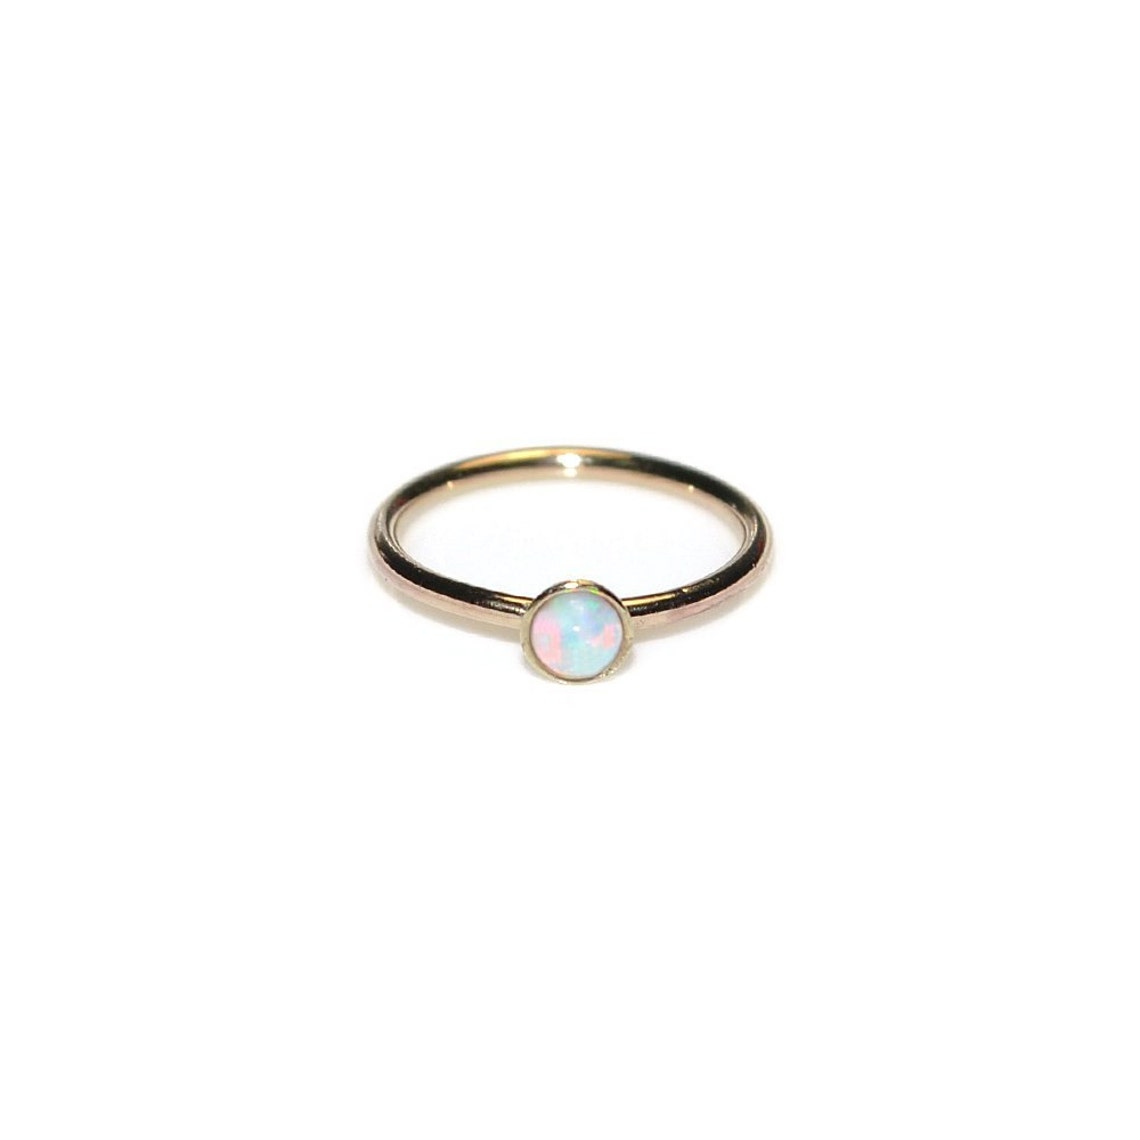 Gold 2mm White Opal Nose Ring 16g / Tragus Hoop Helix - Etsy